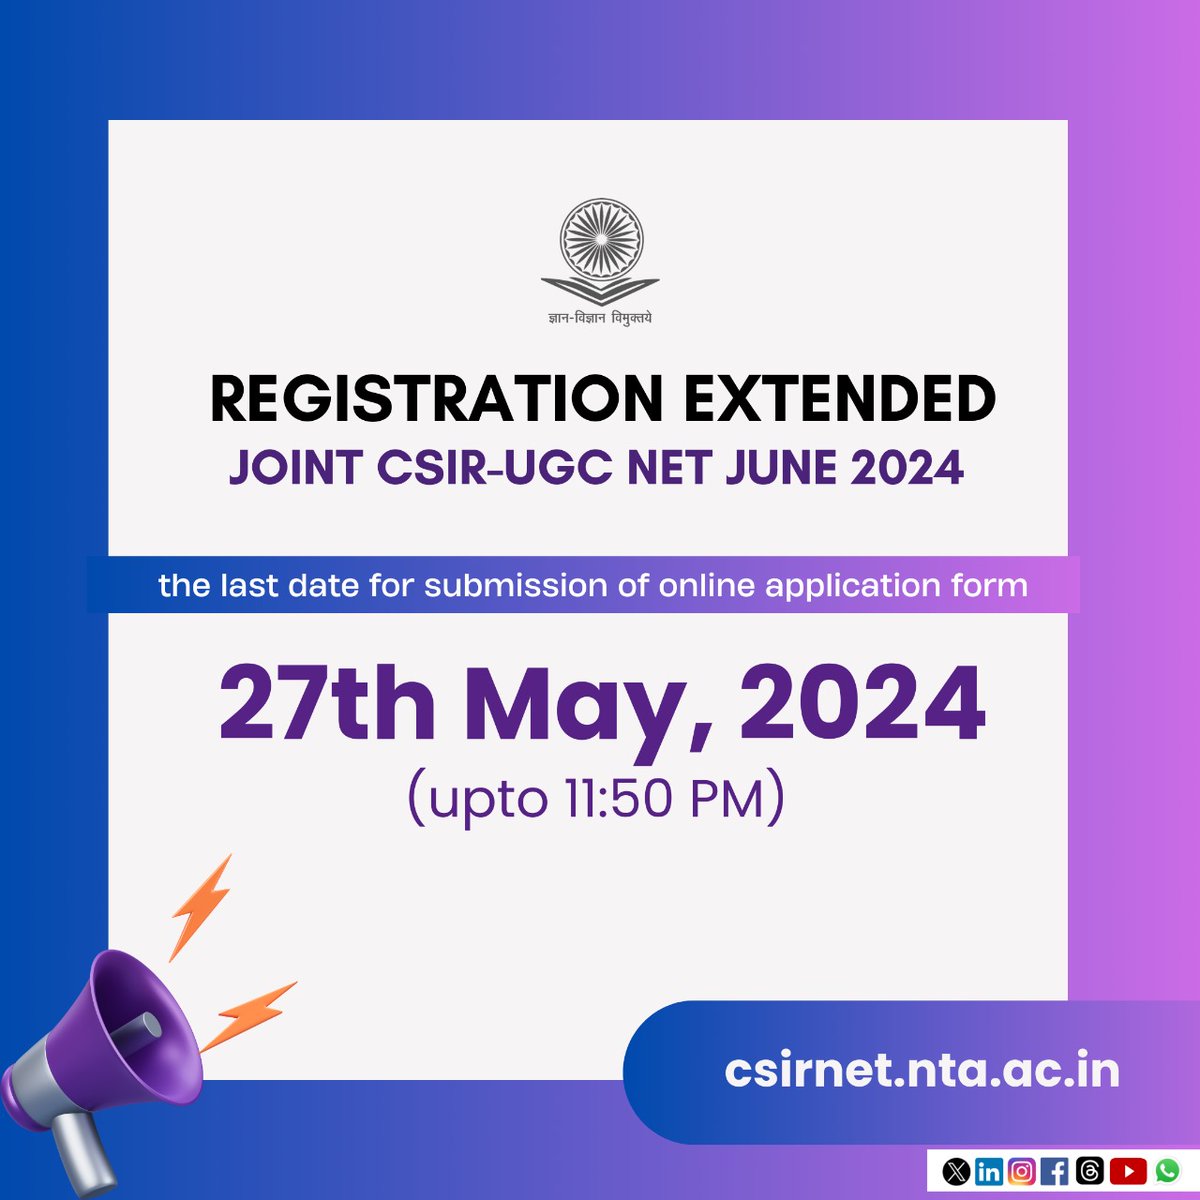 The deadline for online submission of the Joint CSIR-UGC NET Examination June 2024 application form has been extended to May 27, 2024 (up to 11:50 PM). For details visit here: csirnet.nta.ac.in